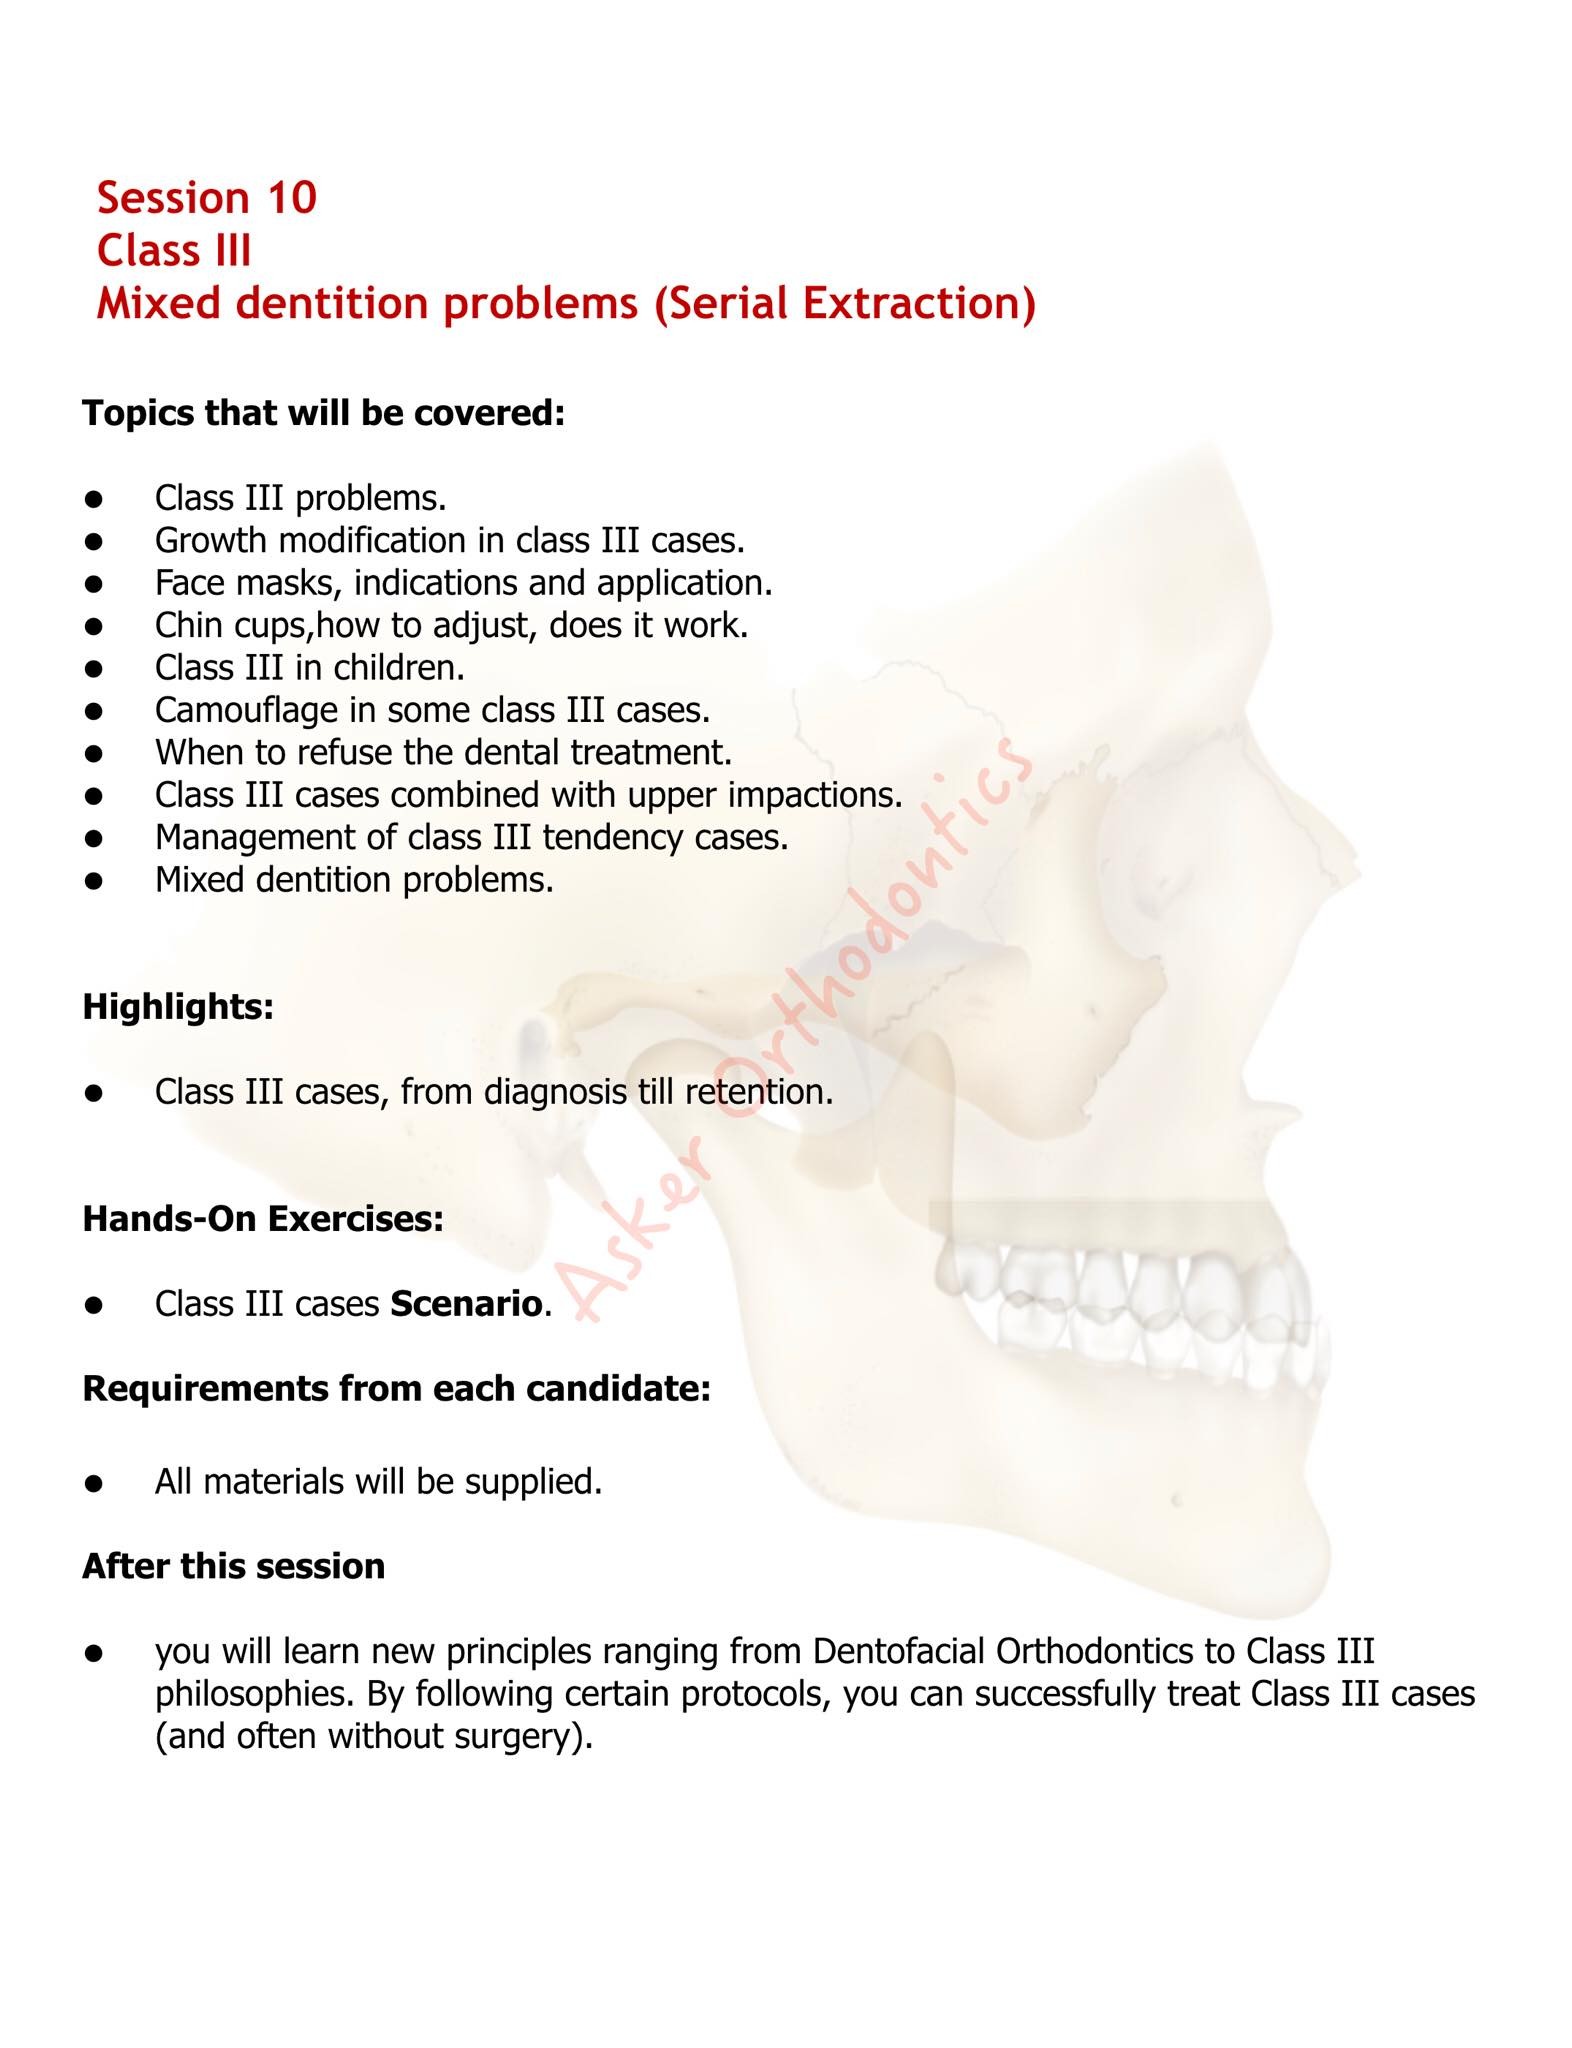 Session 10 (Mixed dentition problems(Serial extraction)) (Class 3) image